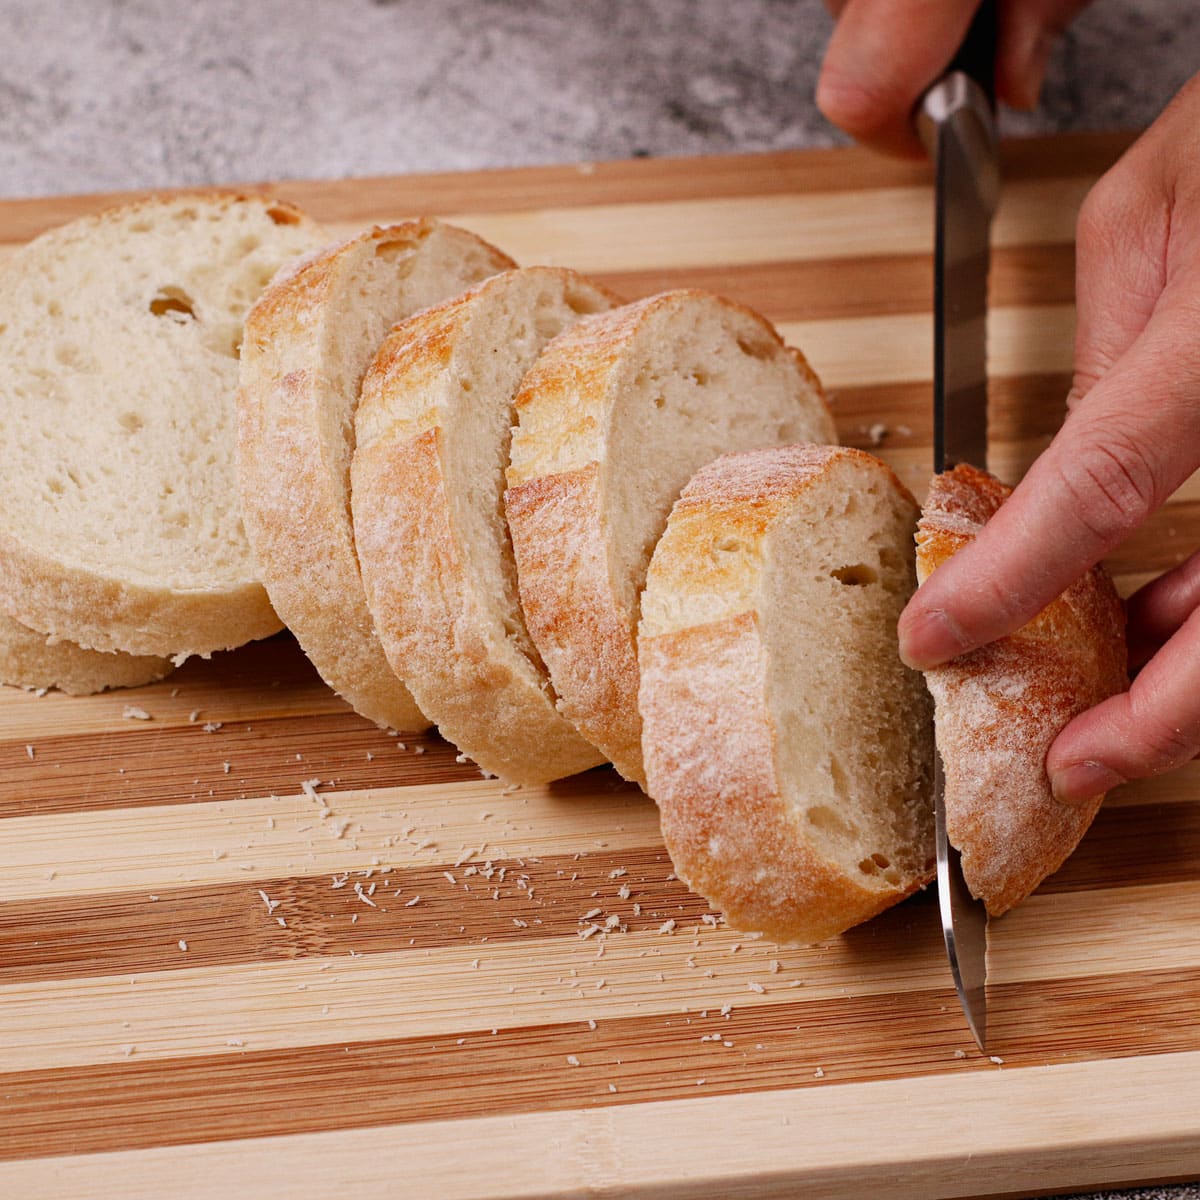 Cutting loaf of bread into 1-inch slices